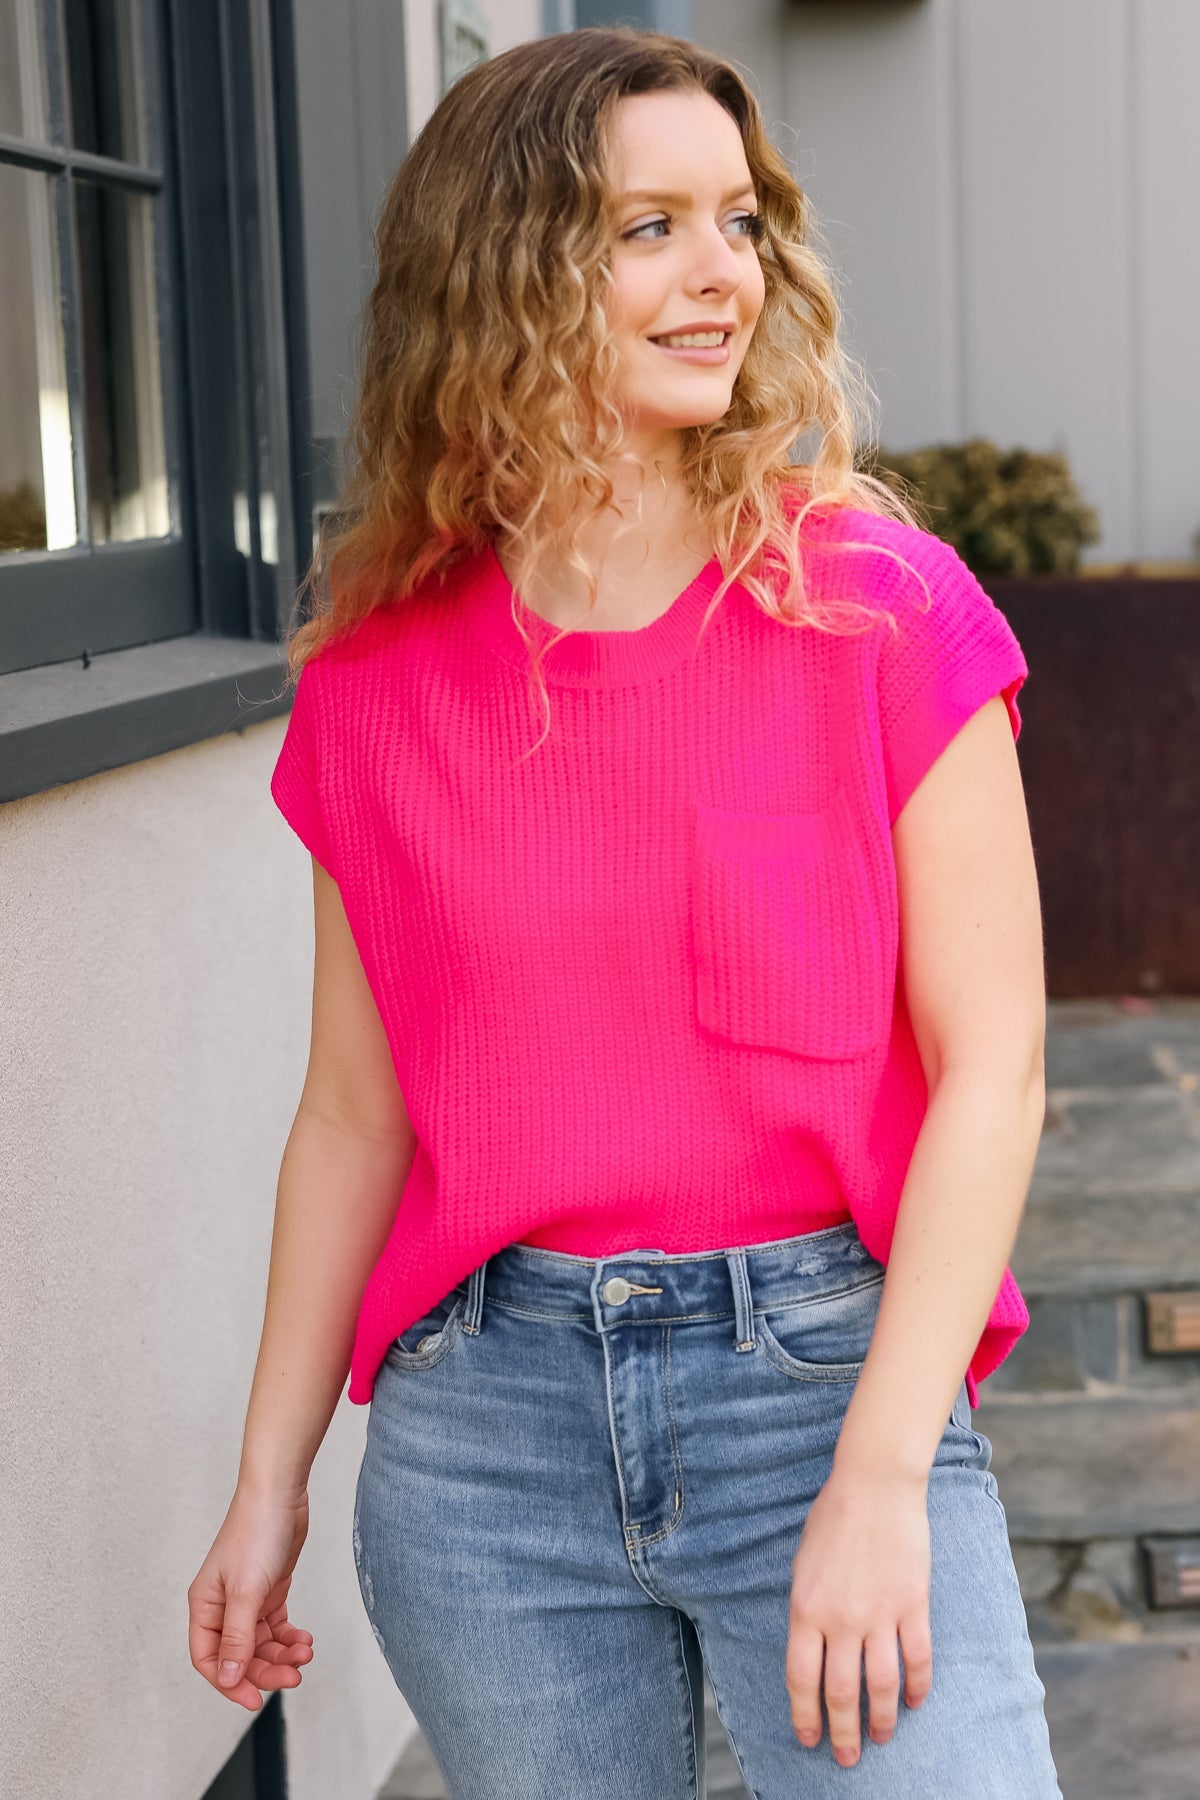 Best In Bold Sweater Top in Hot Pink